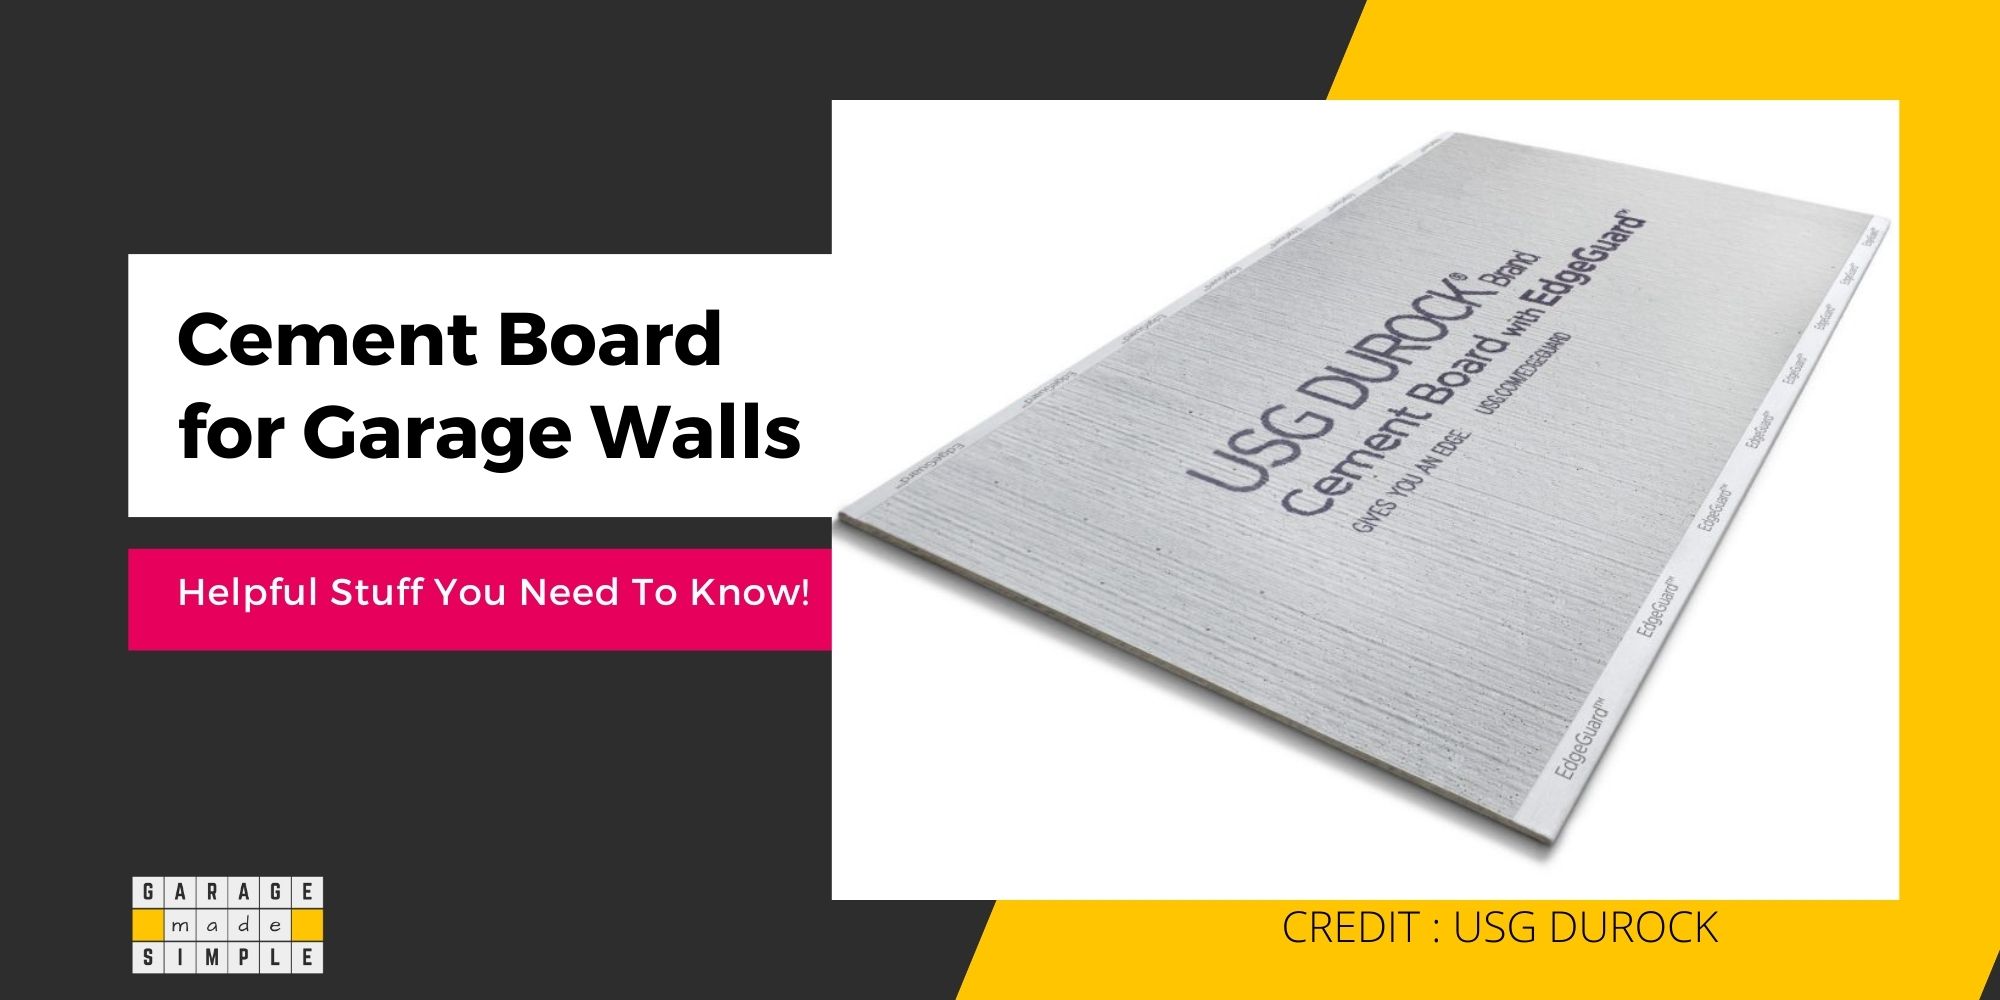 Cement Board For Garage Walls: 6 Important Reasons They Are Better!